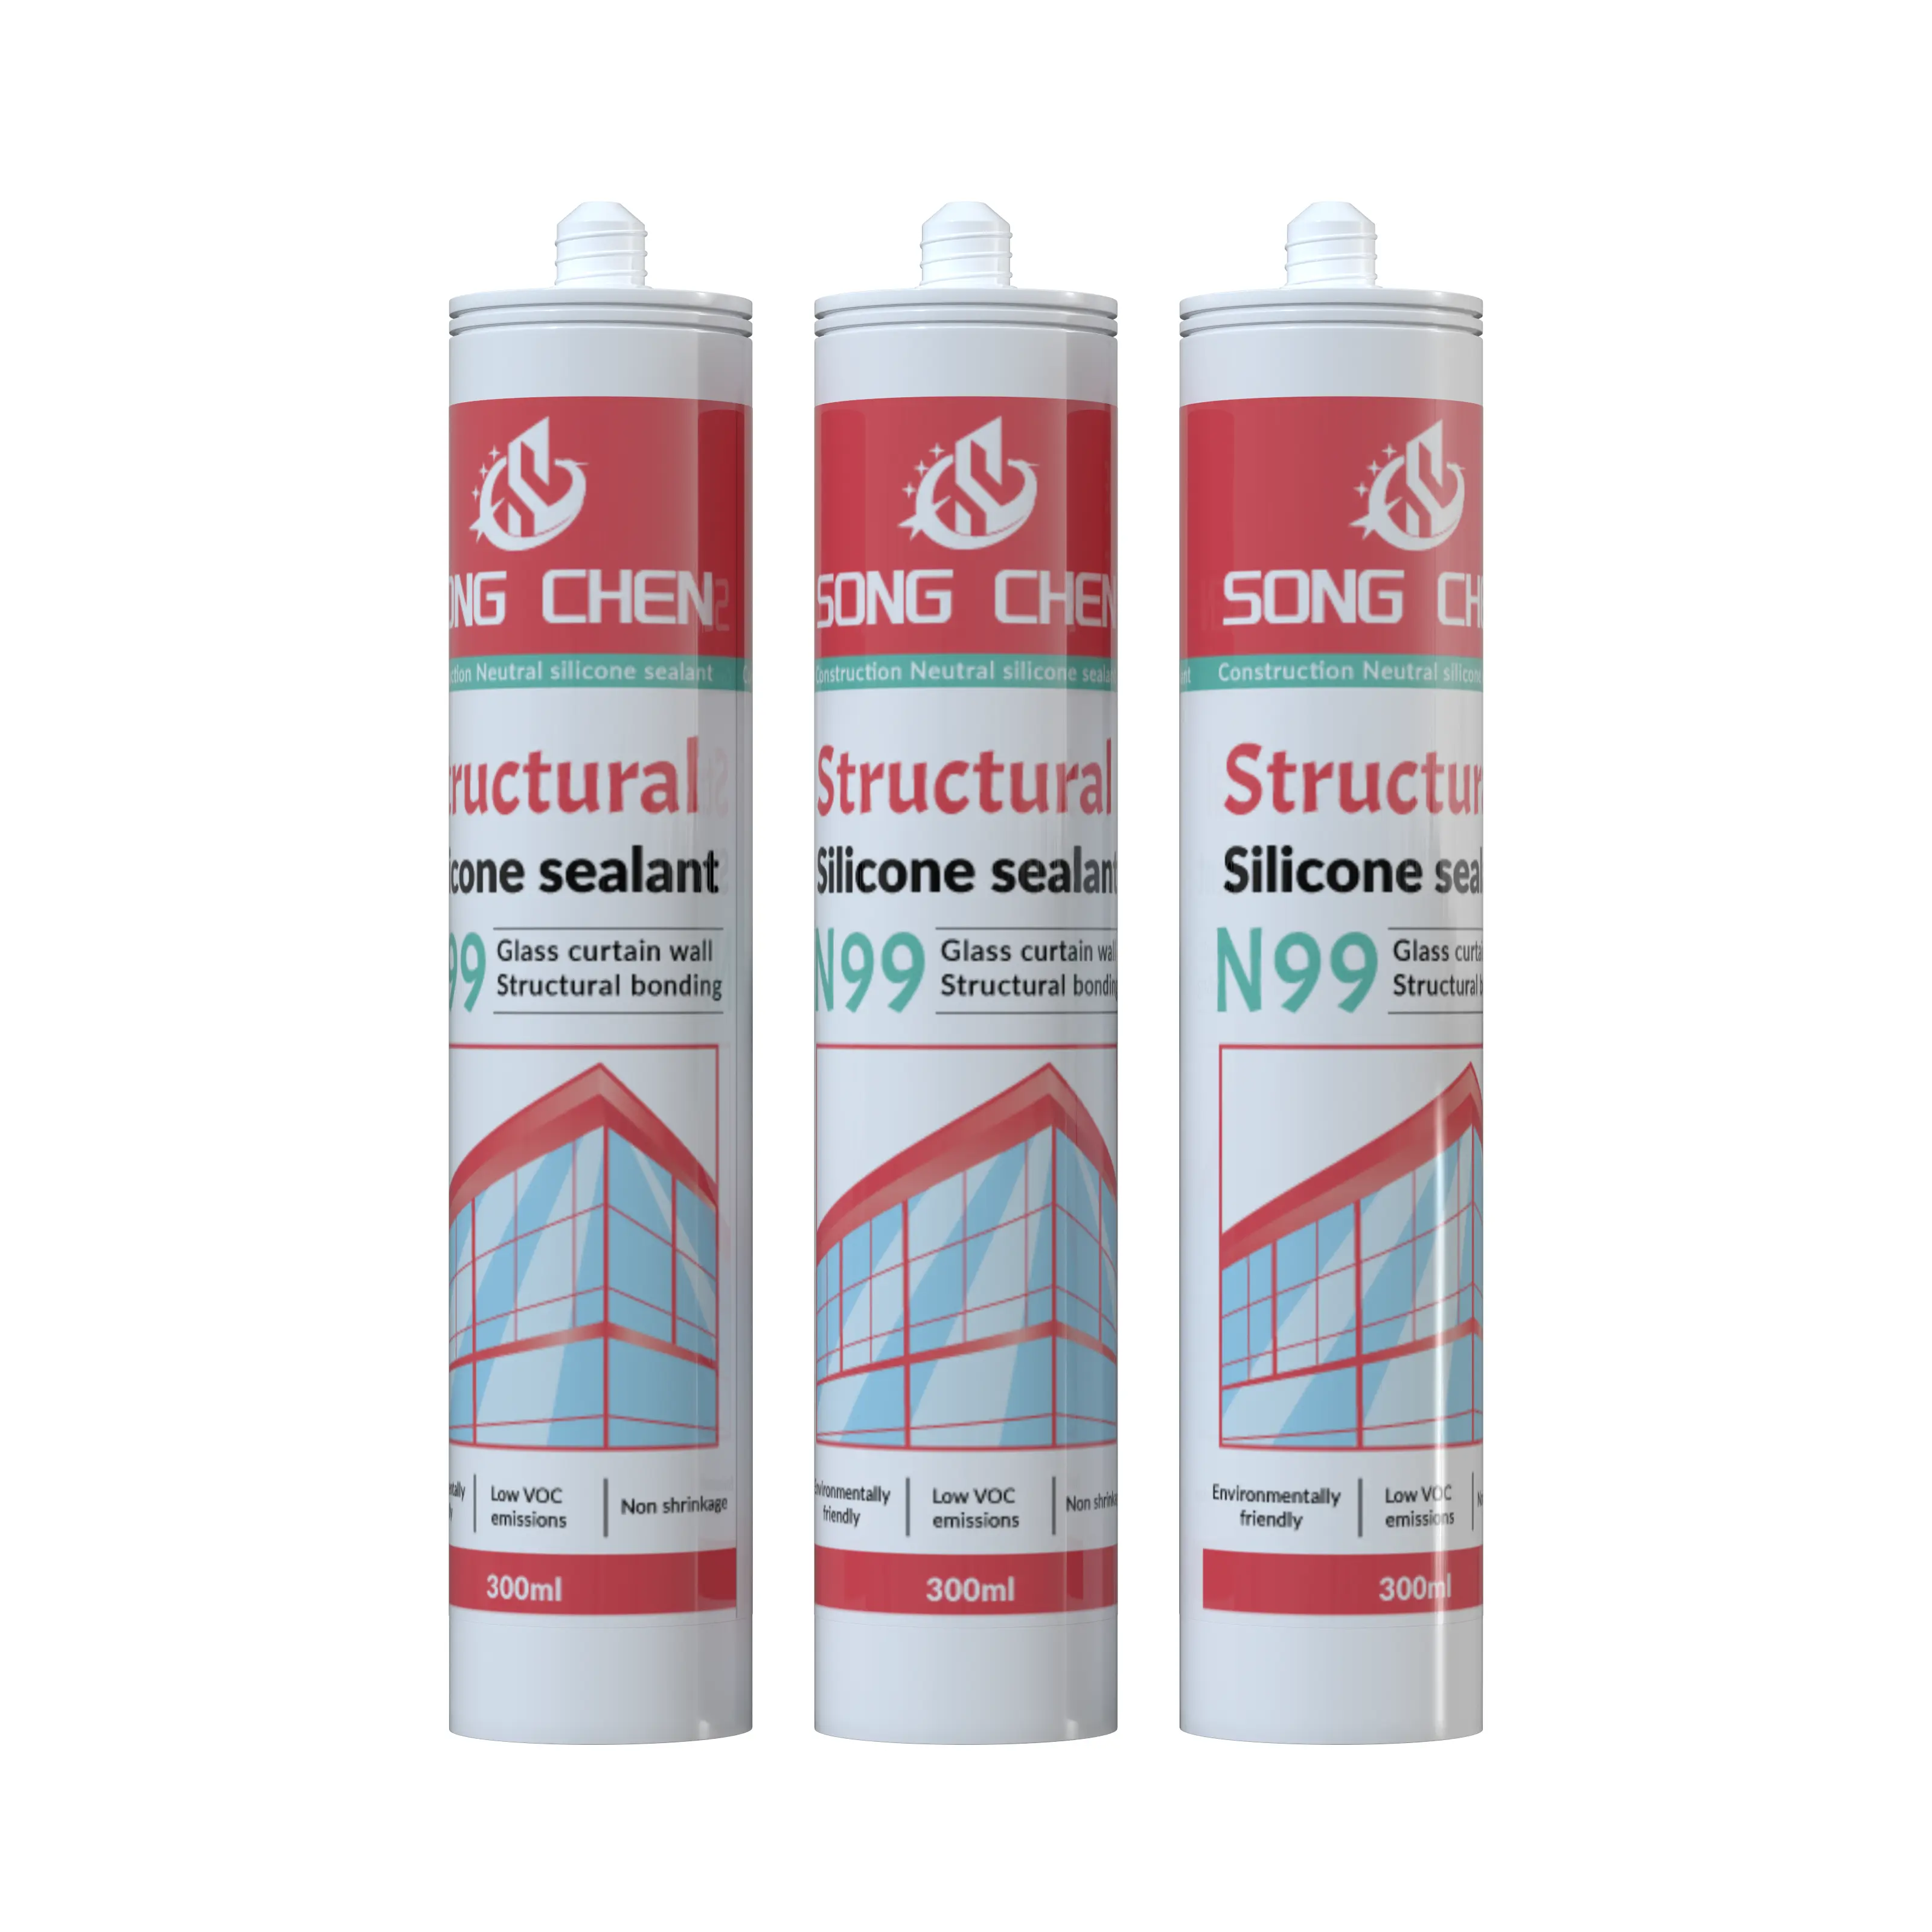 Sealant Supplier Neutral Weatherproof Silicone Sealant for Door, Window, Curtain Wall Glass 300ml 590ml OEM Sealant